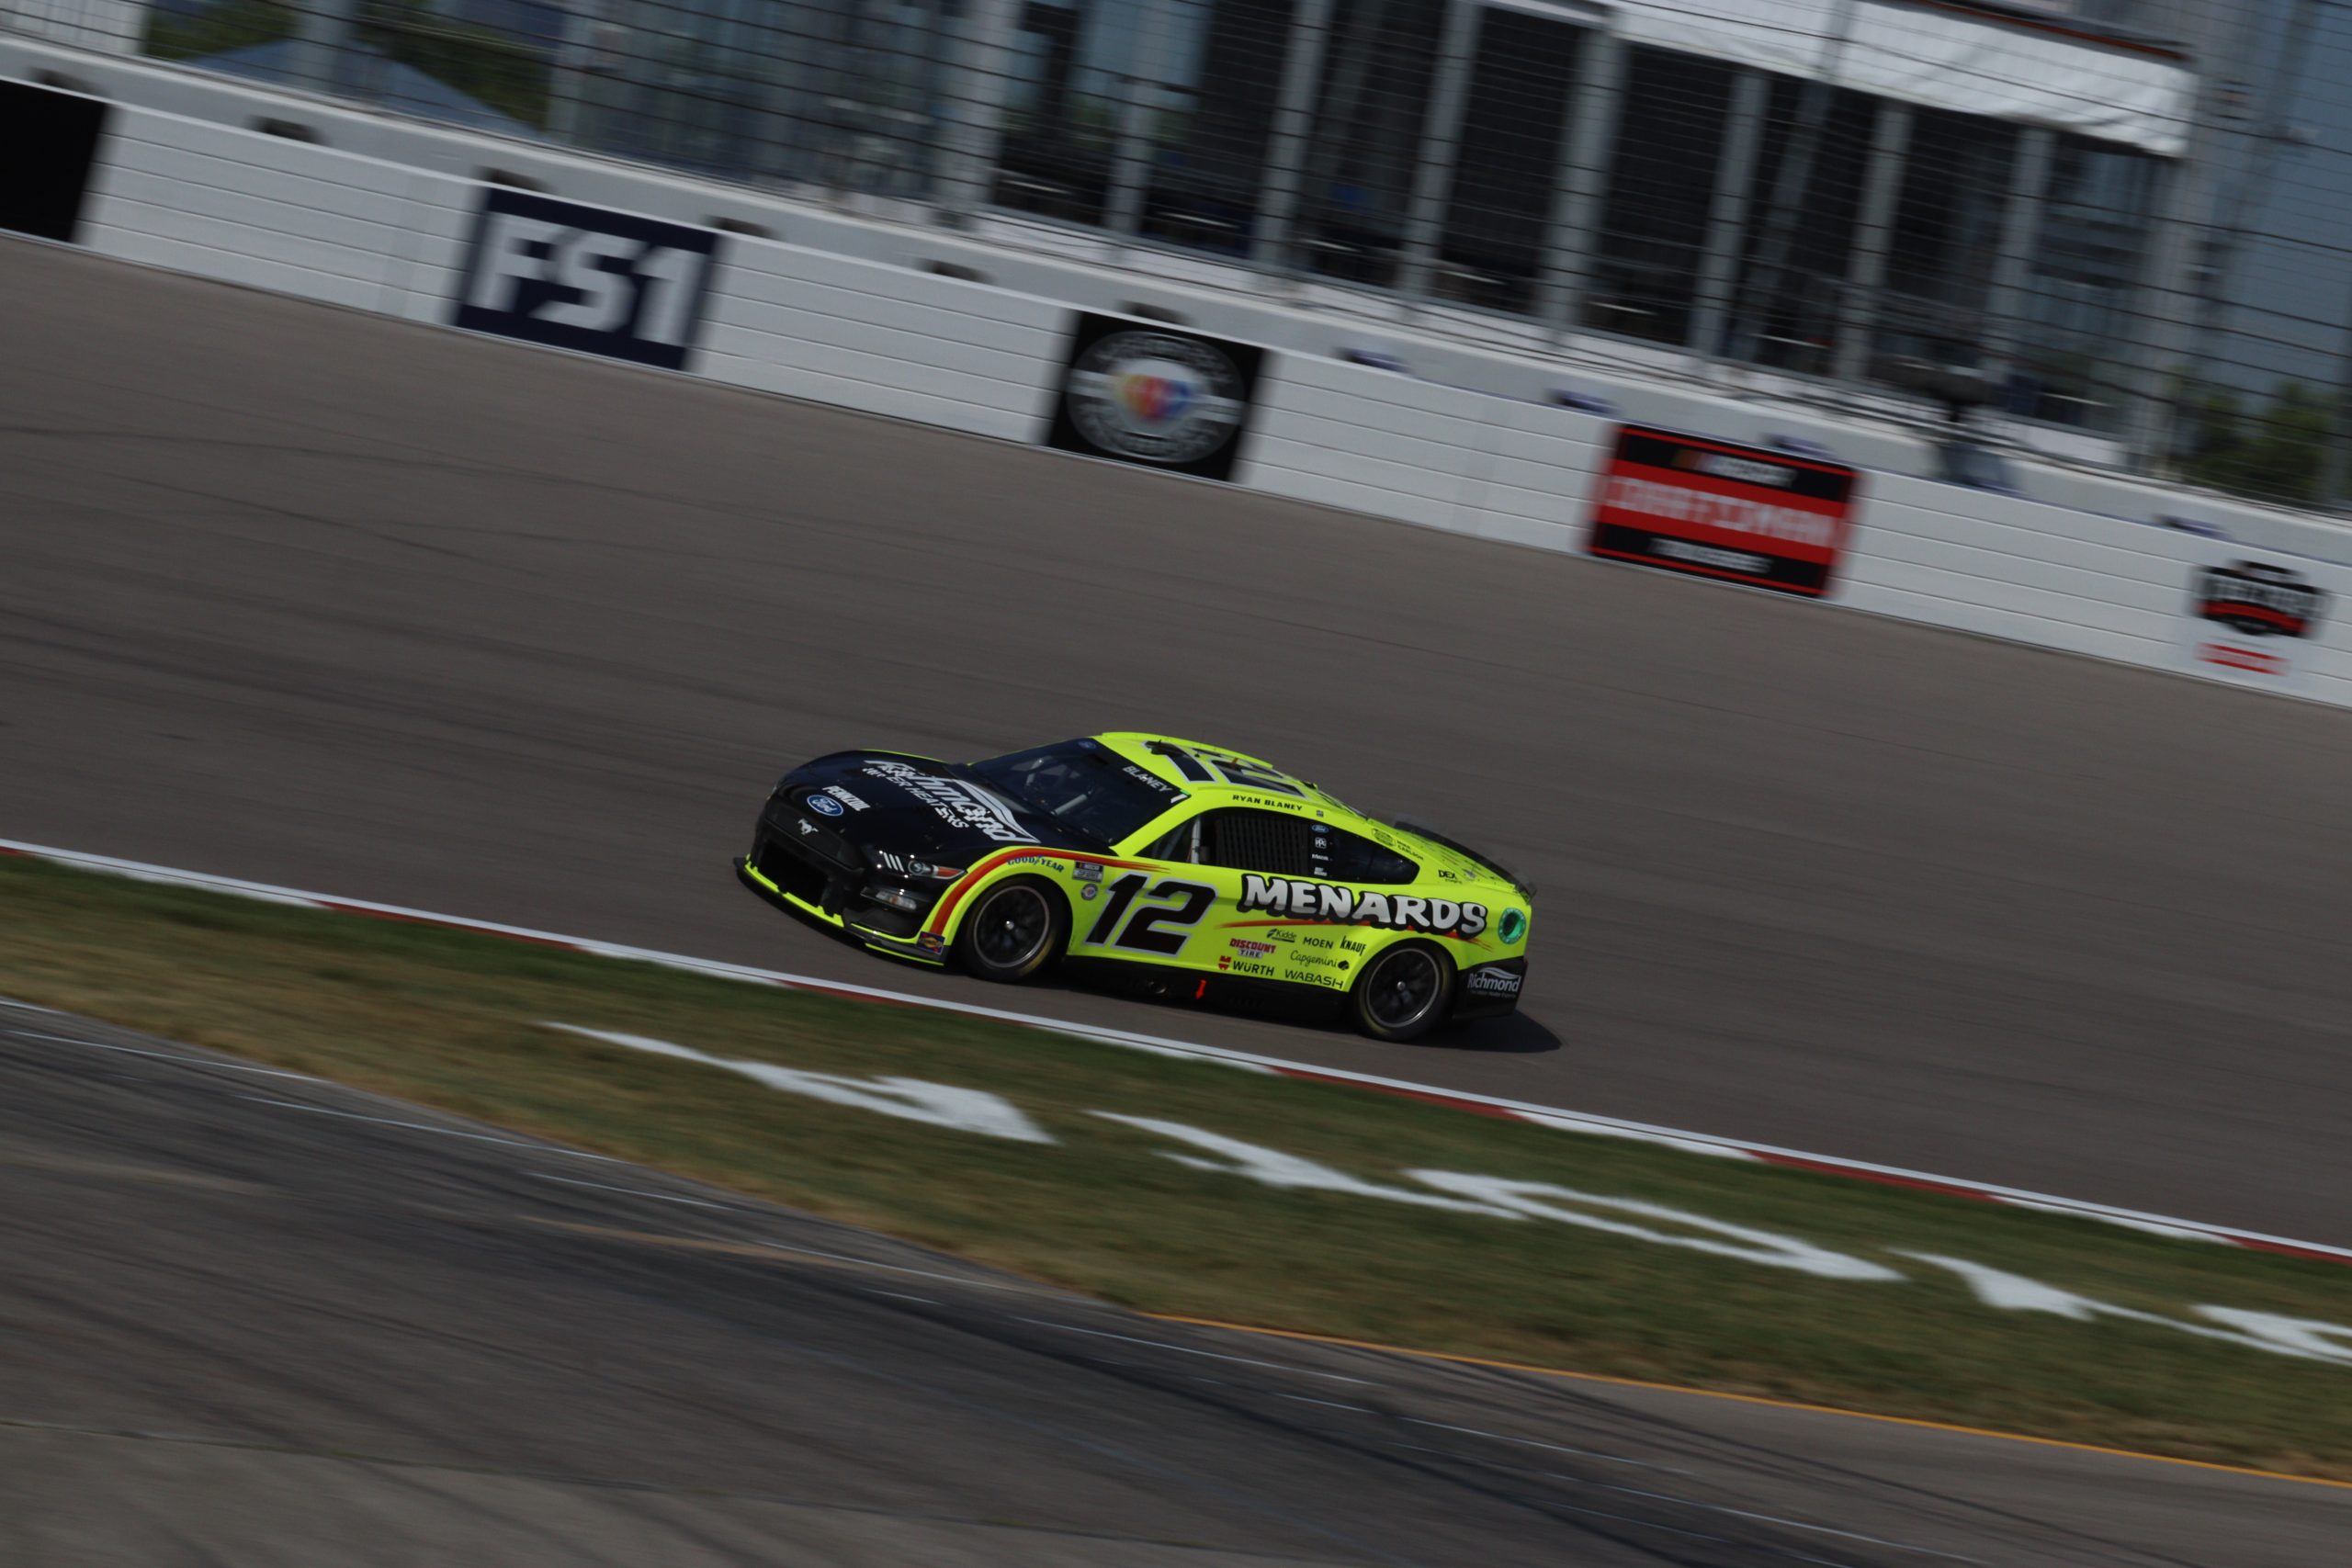 Ryan Blaney would love to go back-to-back with victories, starting from the second position in Sunday's Enjoy Illinois 300 at Gateway. (Photo: Bobby Krug | The Podium Finish)